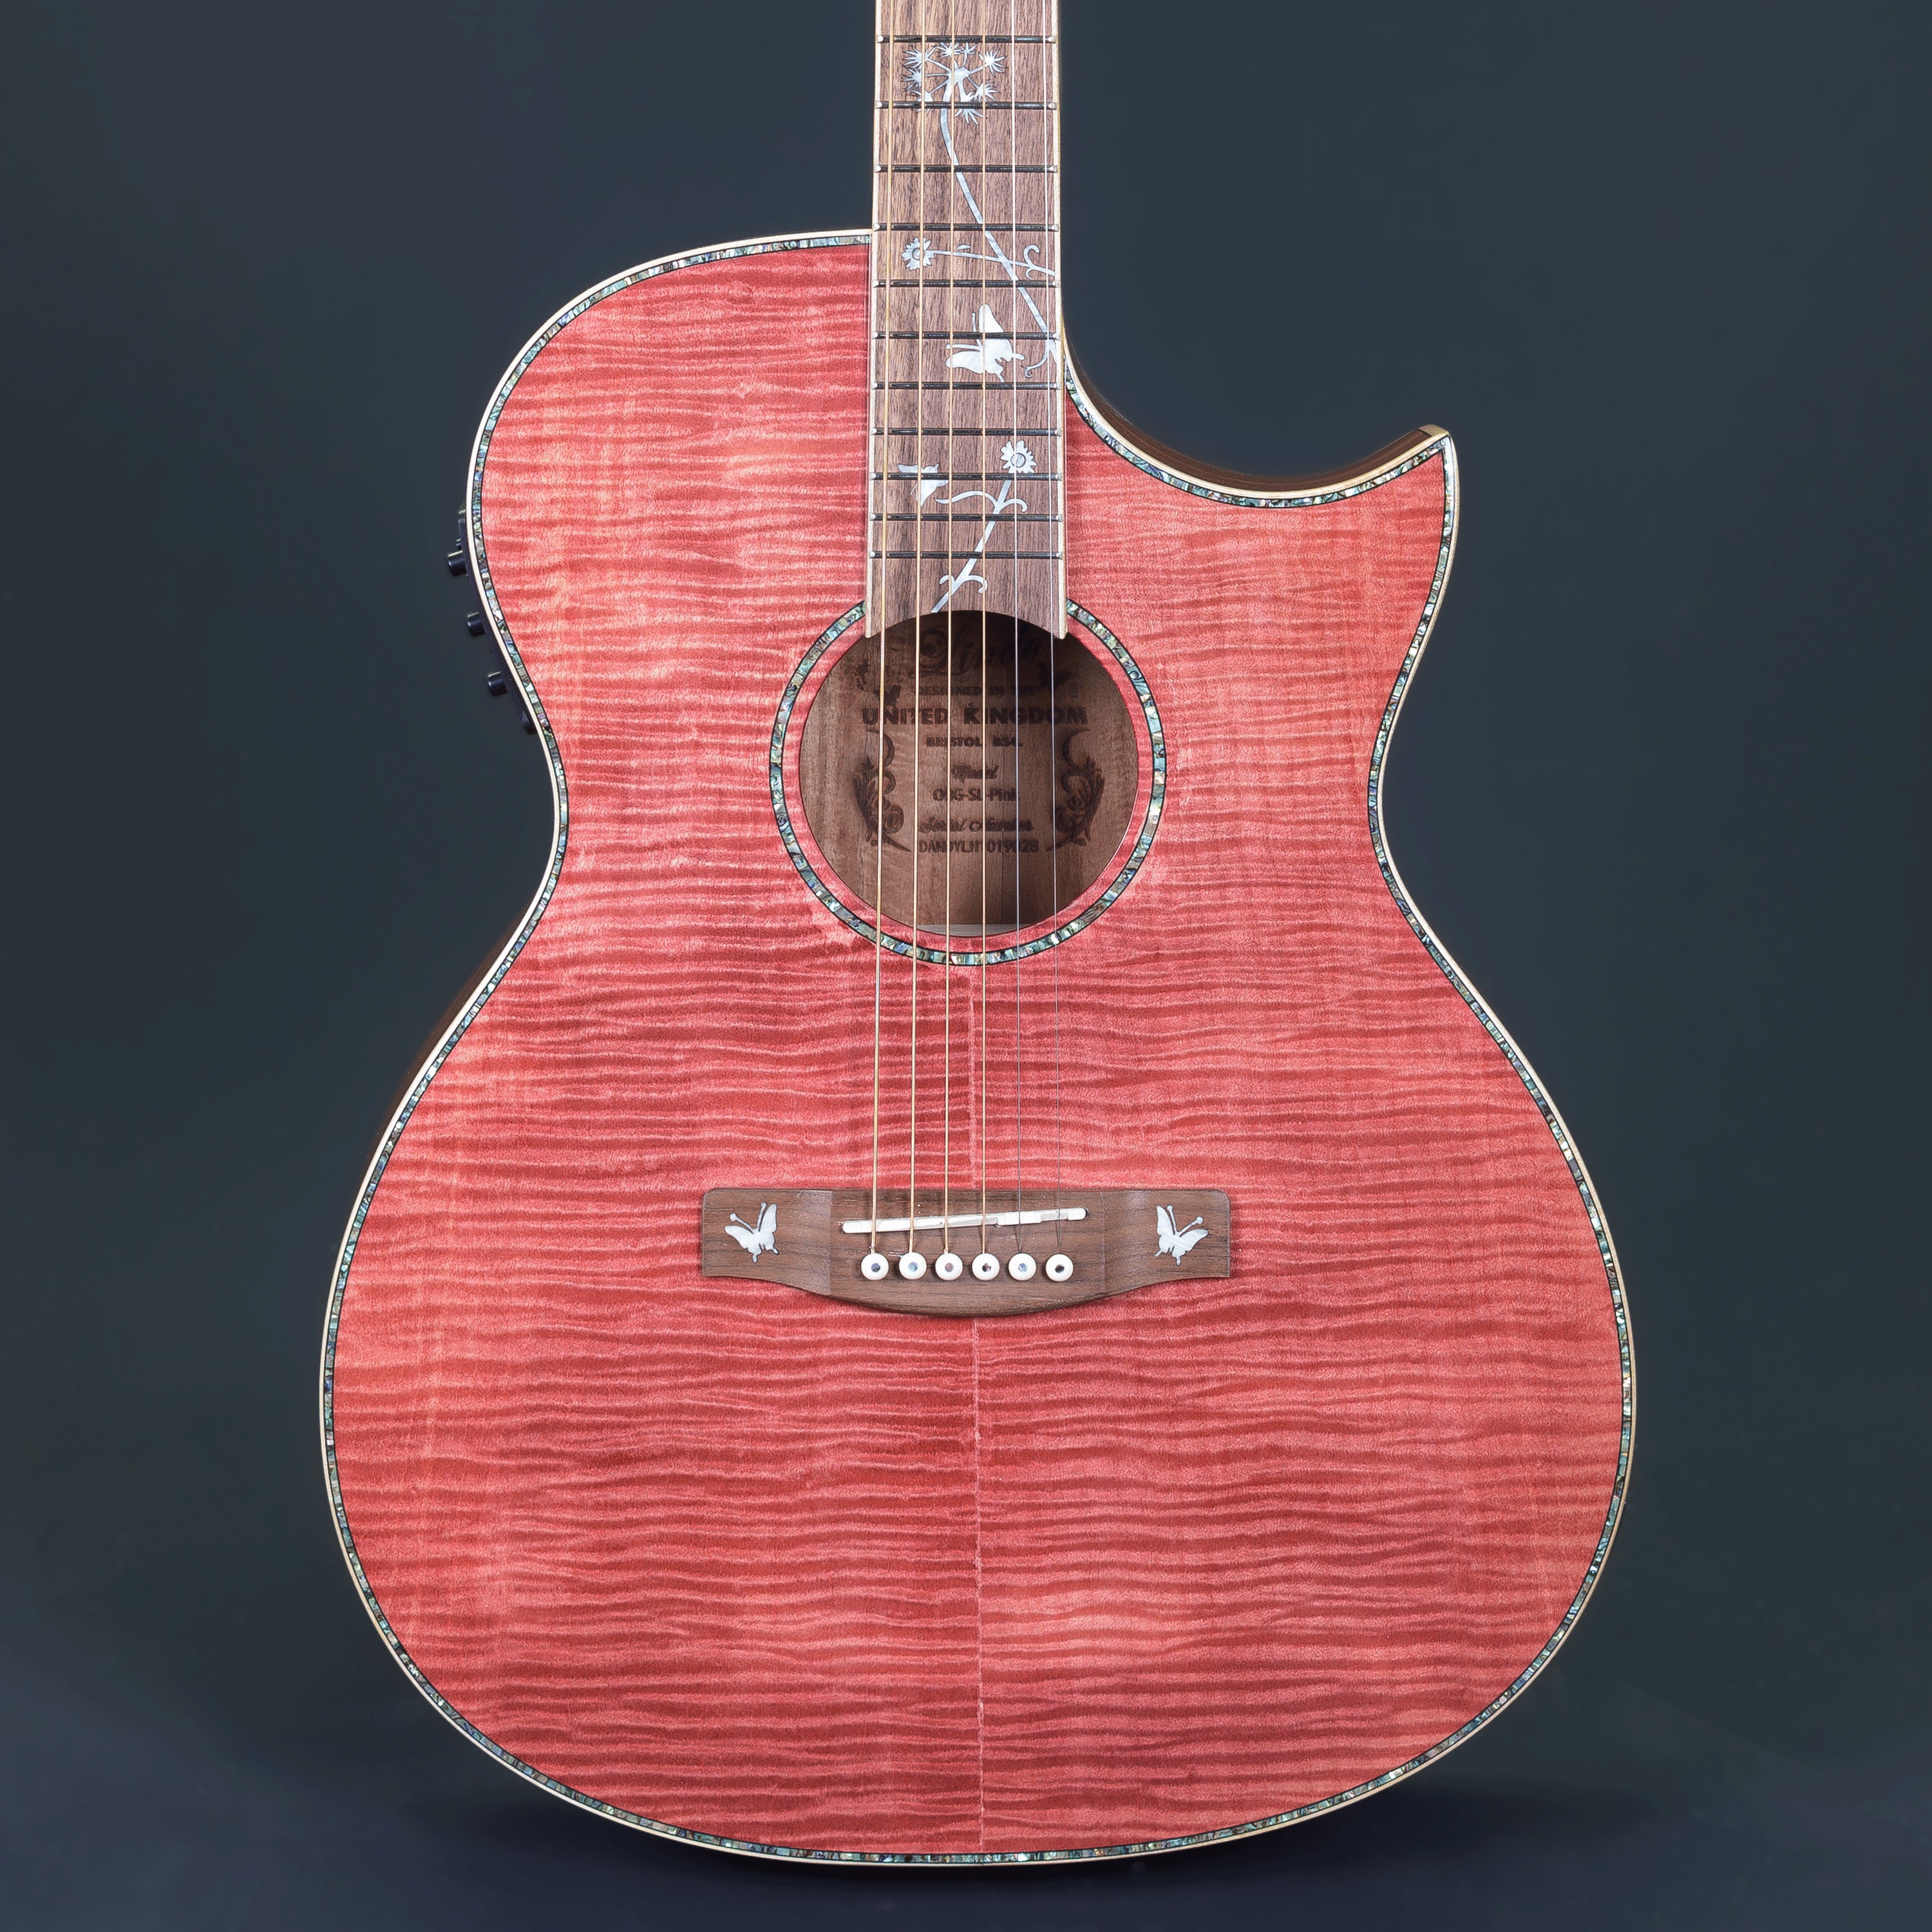 Lindo Dandelion Pink Slim Body Electro-acoustic Guitar With pic